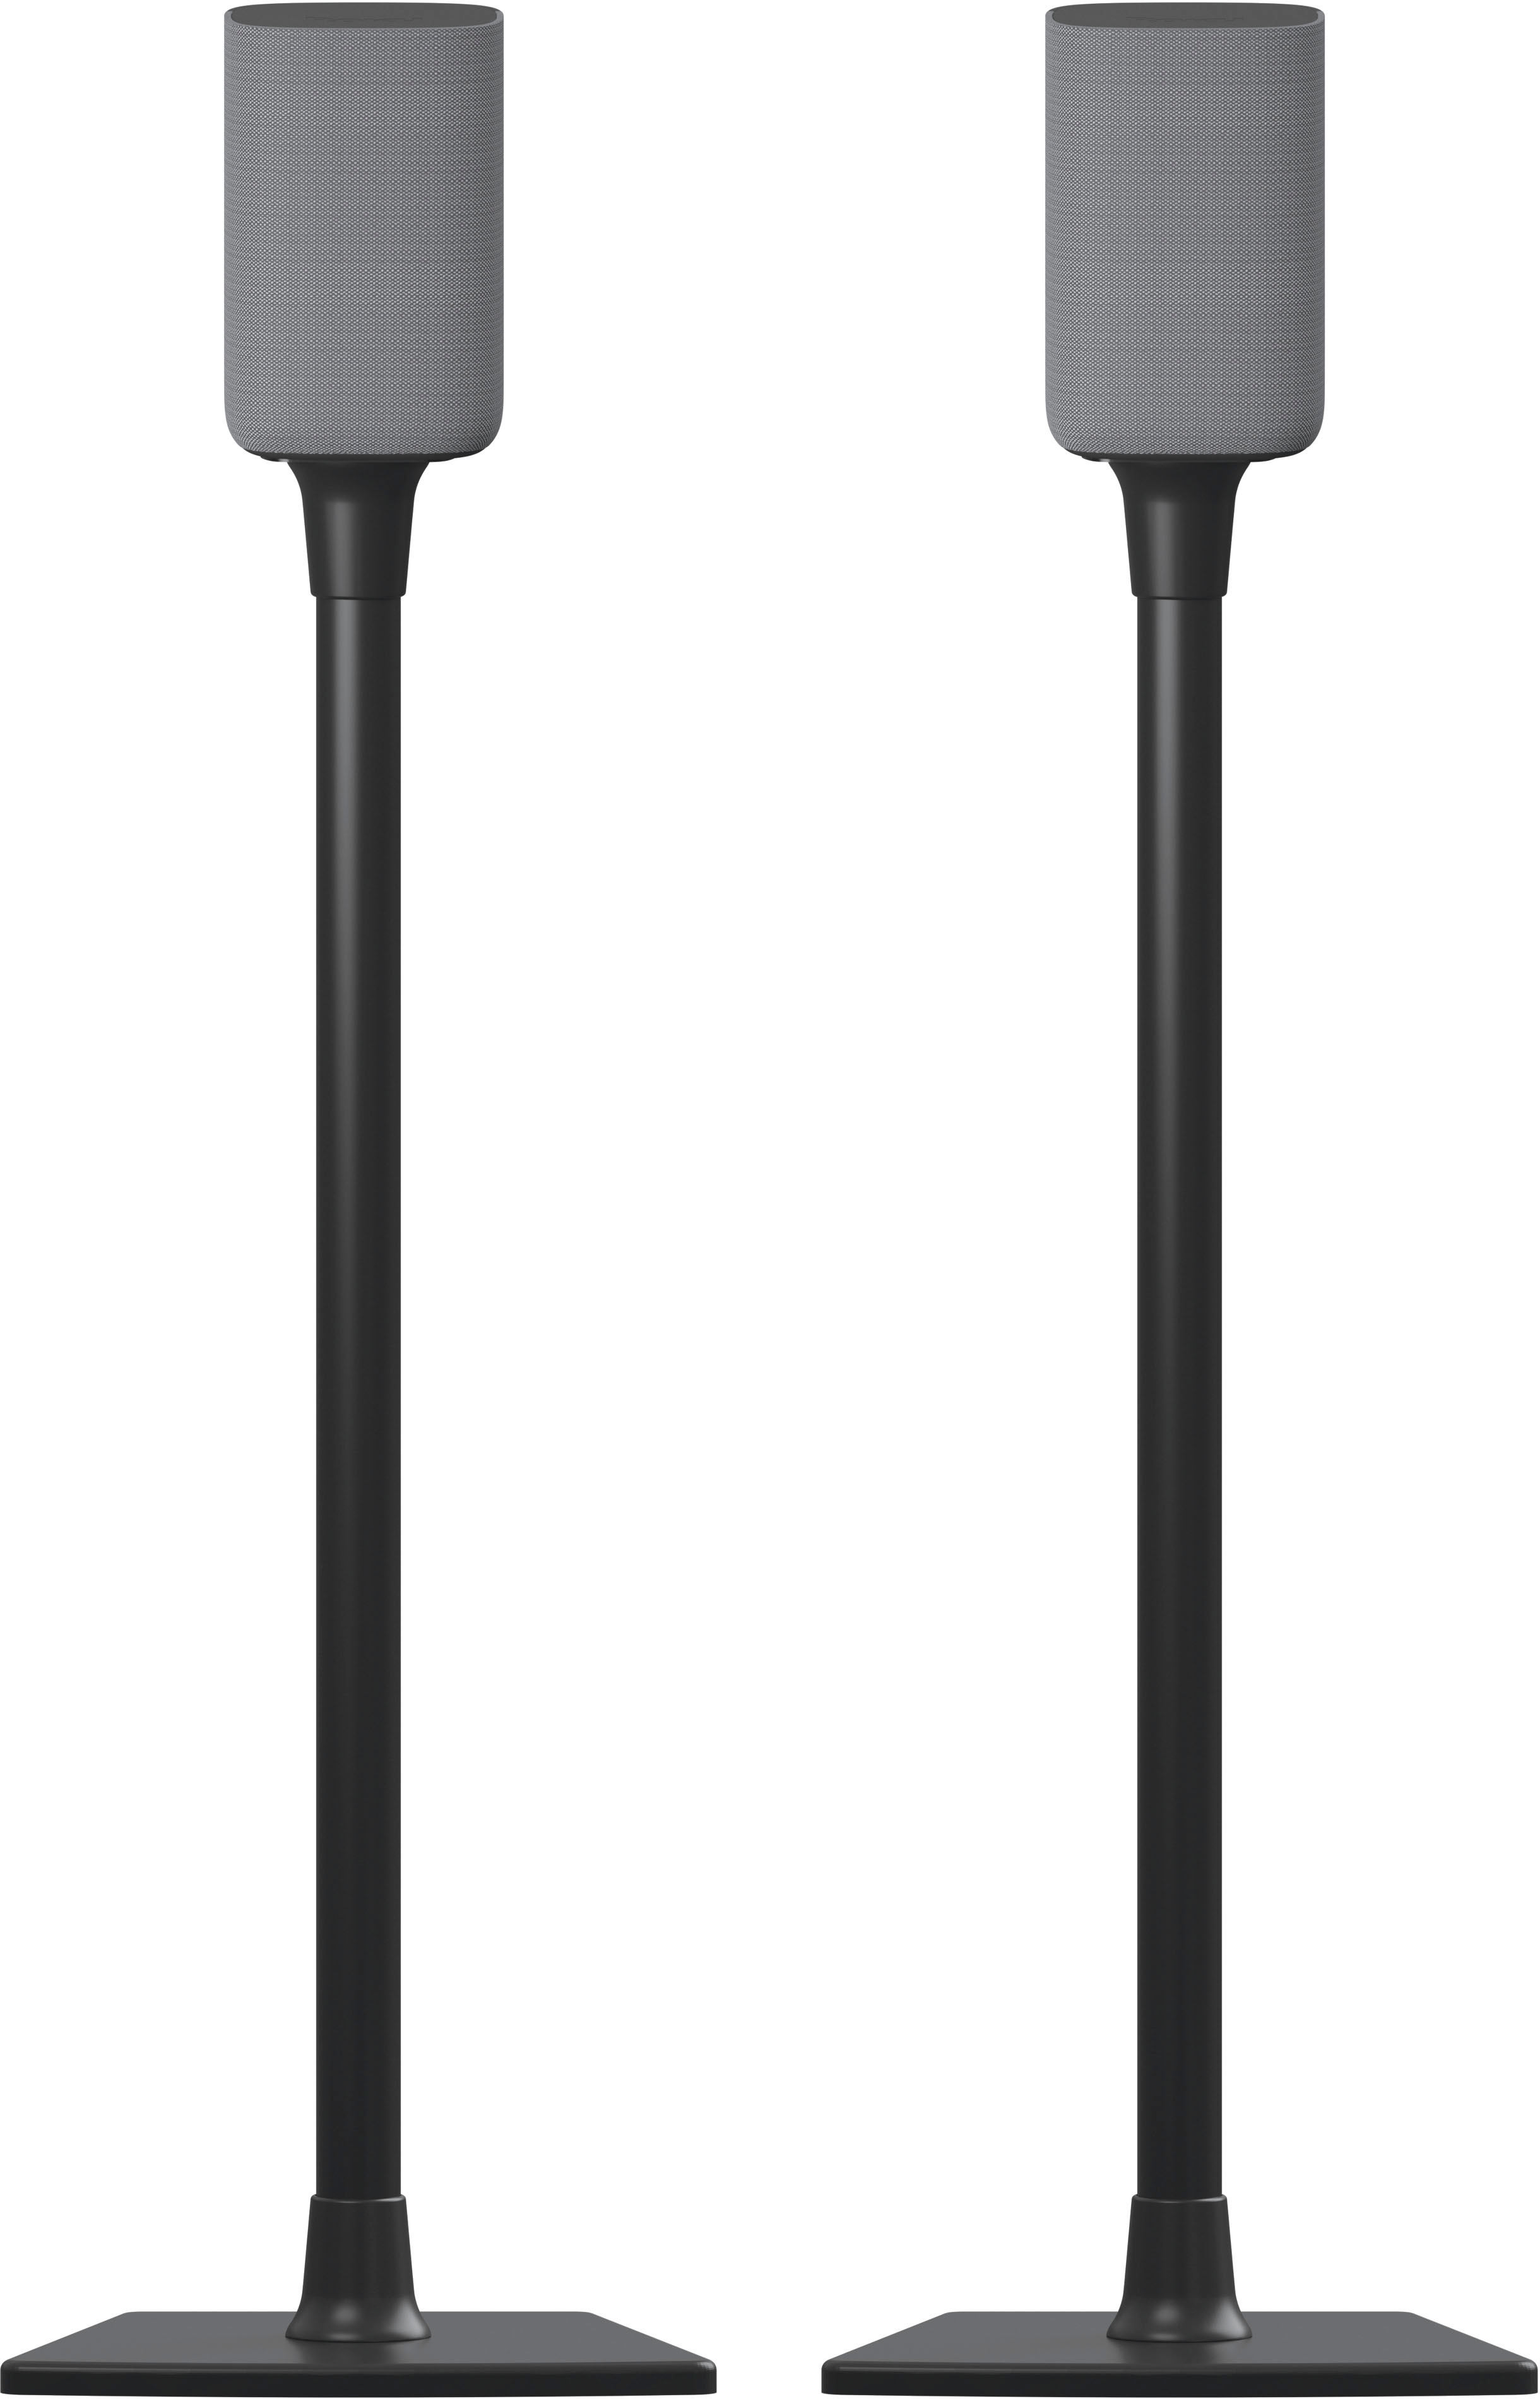 Angle View: Bose OmniJewel floorstands - Stand - for speaker(s) - extruded aluminum, tempered glass - black - floor-standing (pack of 2) - for Lifestyle 650